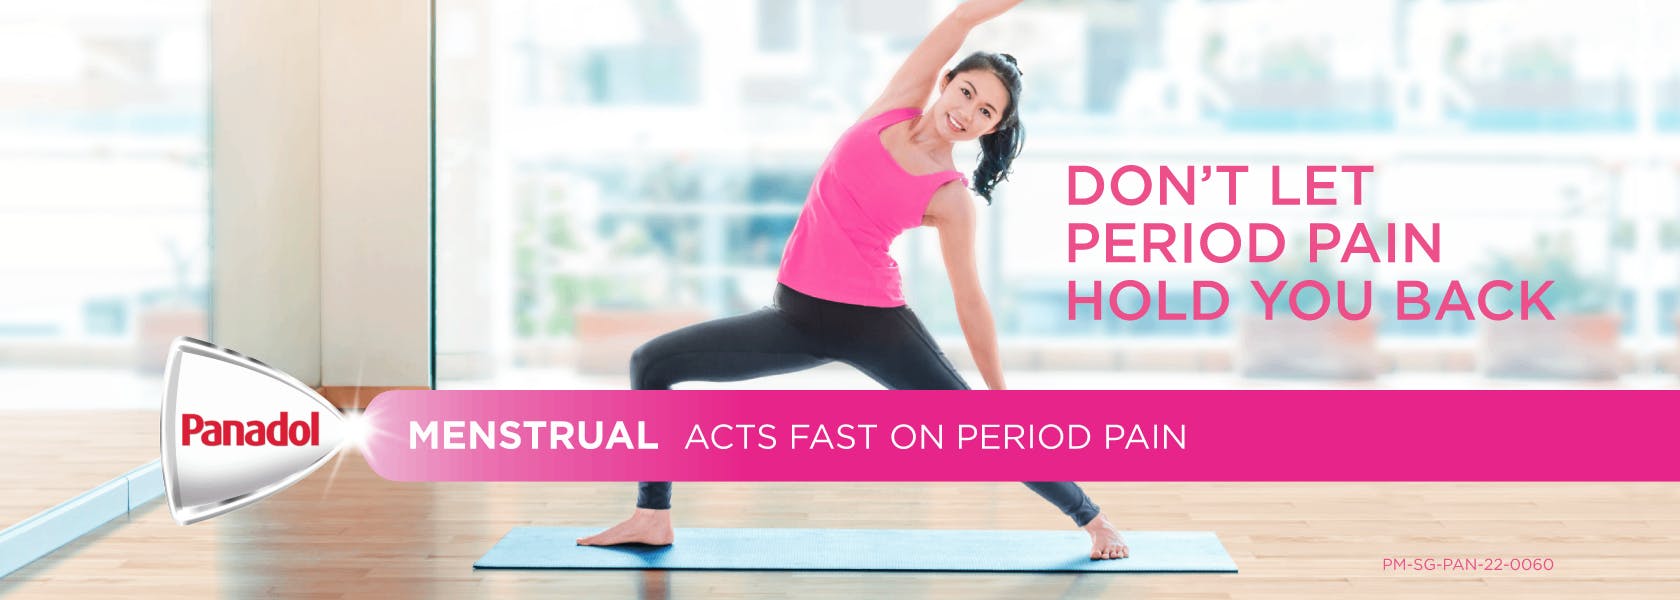 Dont let period pain hold you back